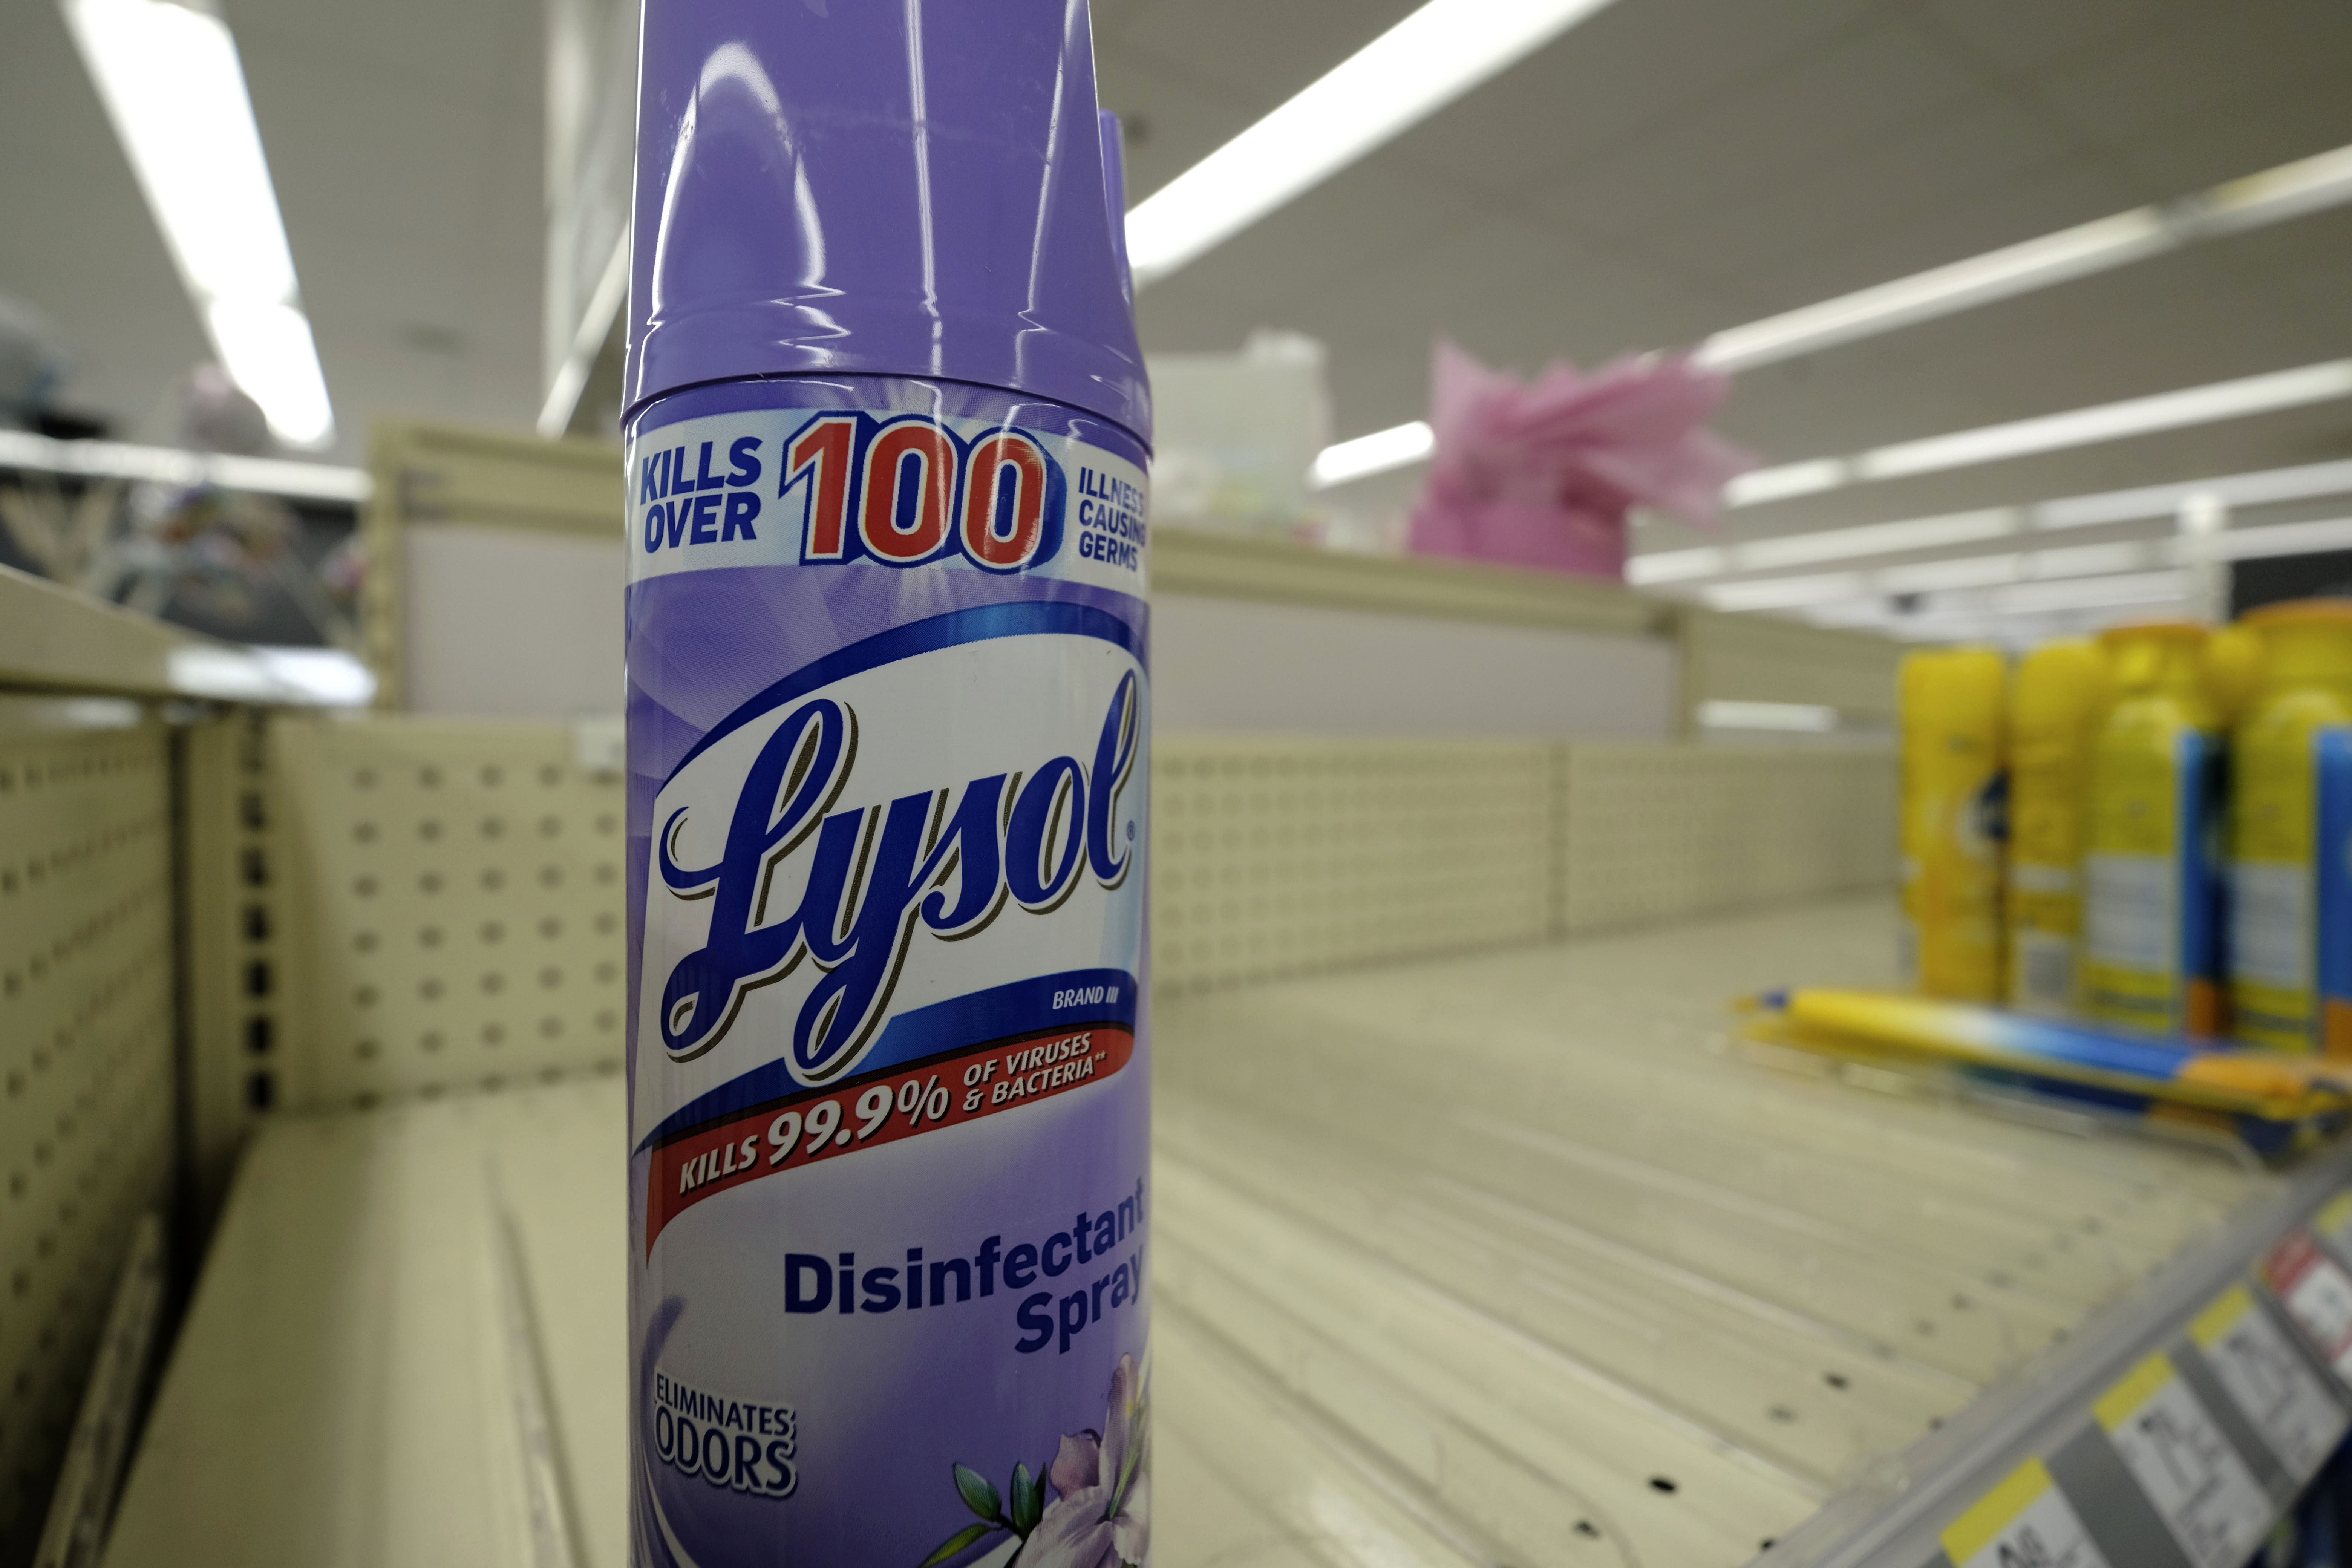 A single can of Lysol disinfectant spray remains on the shelf of a Walgreens in Portland, Ore., on March 2, 2020. There are currently three presumptive cases of the novel coronavirus (COVID-19) in the state, and people have been buying up supplies across the city. (Photo by Alex Milan Tracy/Sipa USA)(Sipa via AP Images)